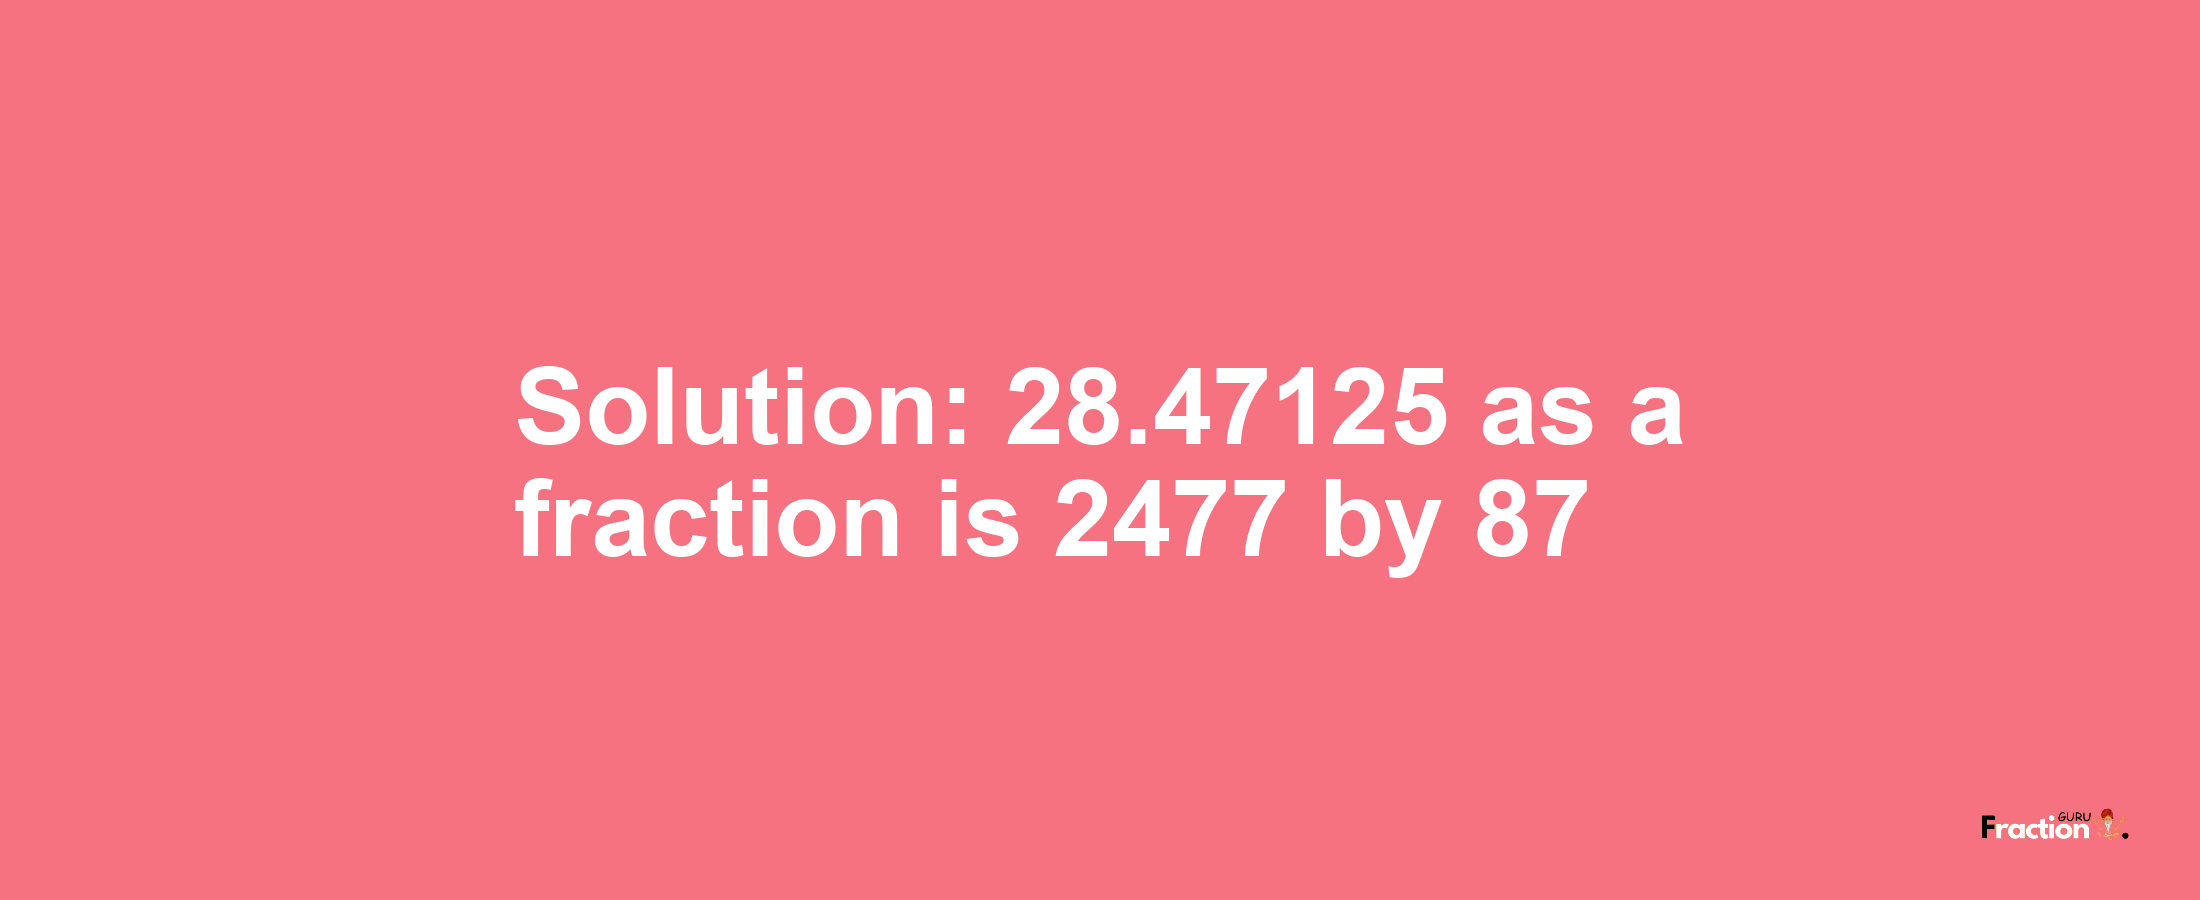 Solution:28.47125 as a fraction is 2477/87